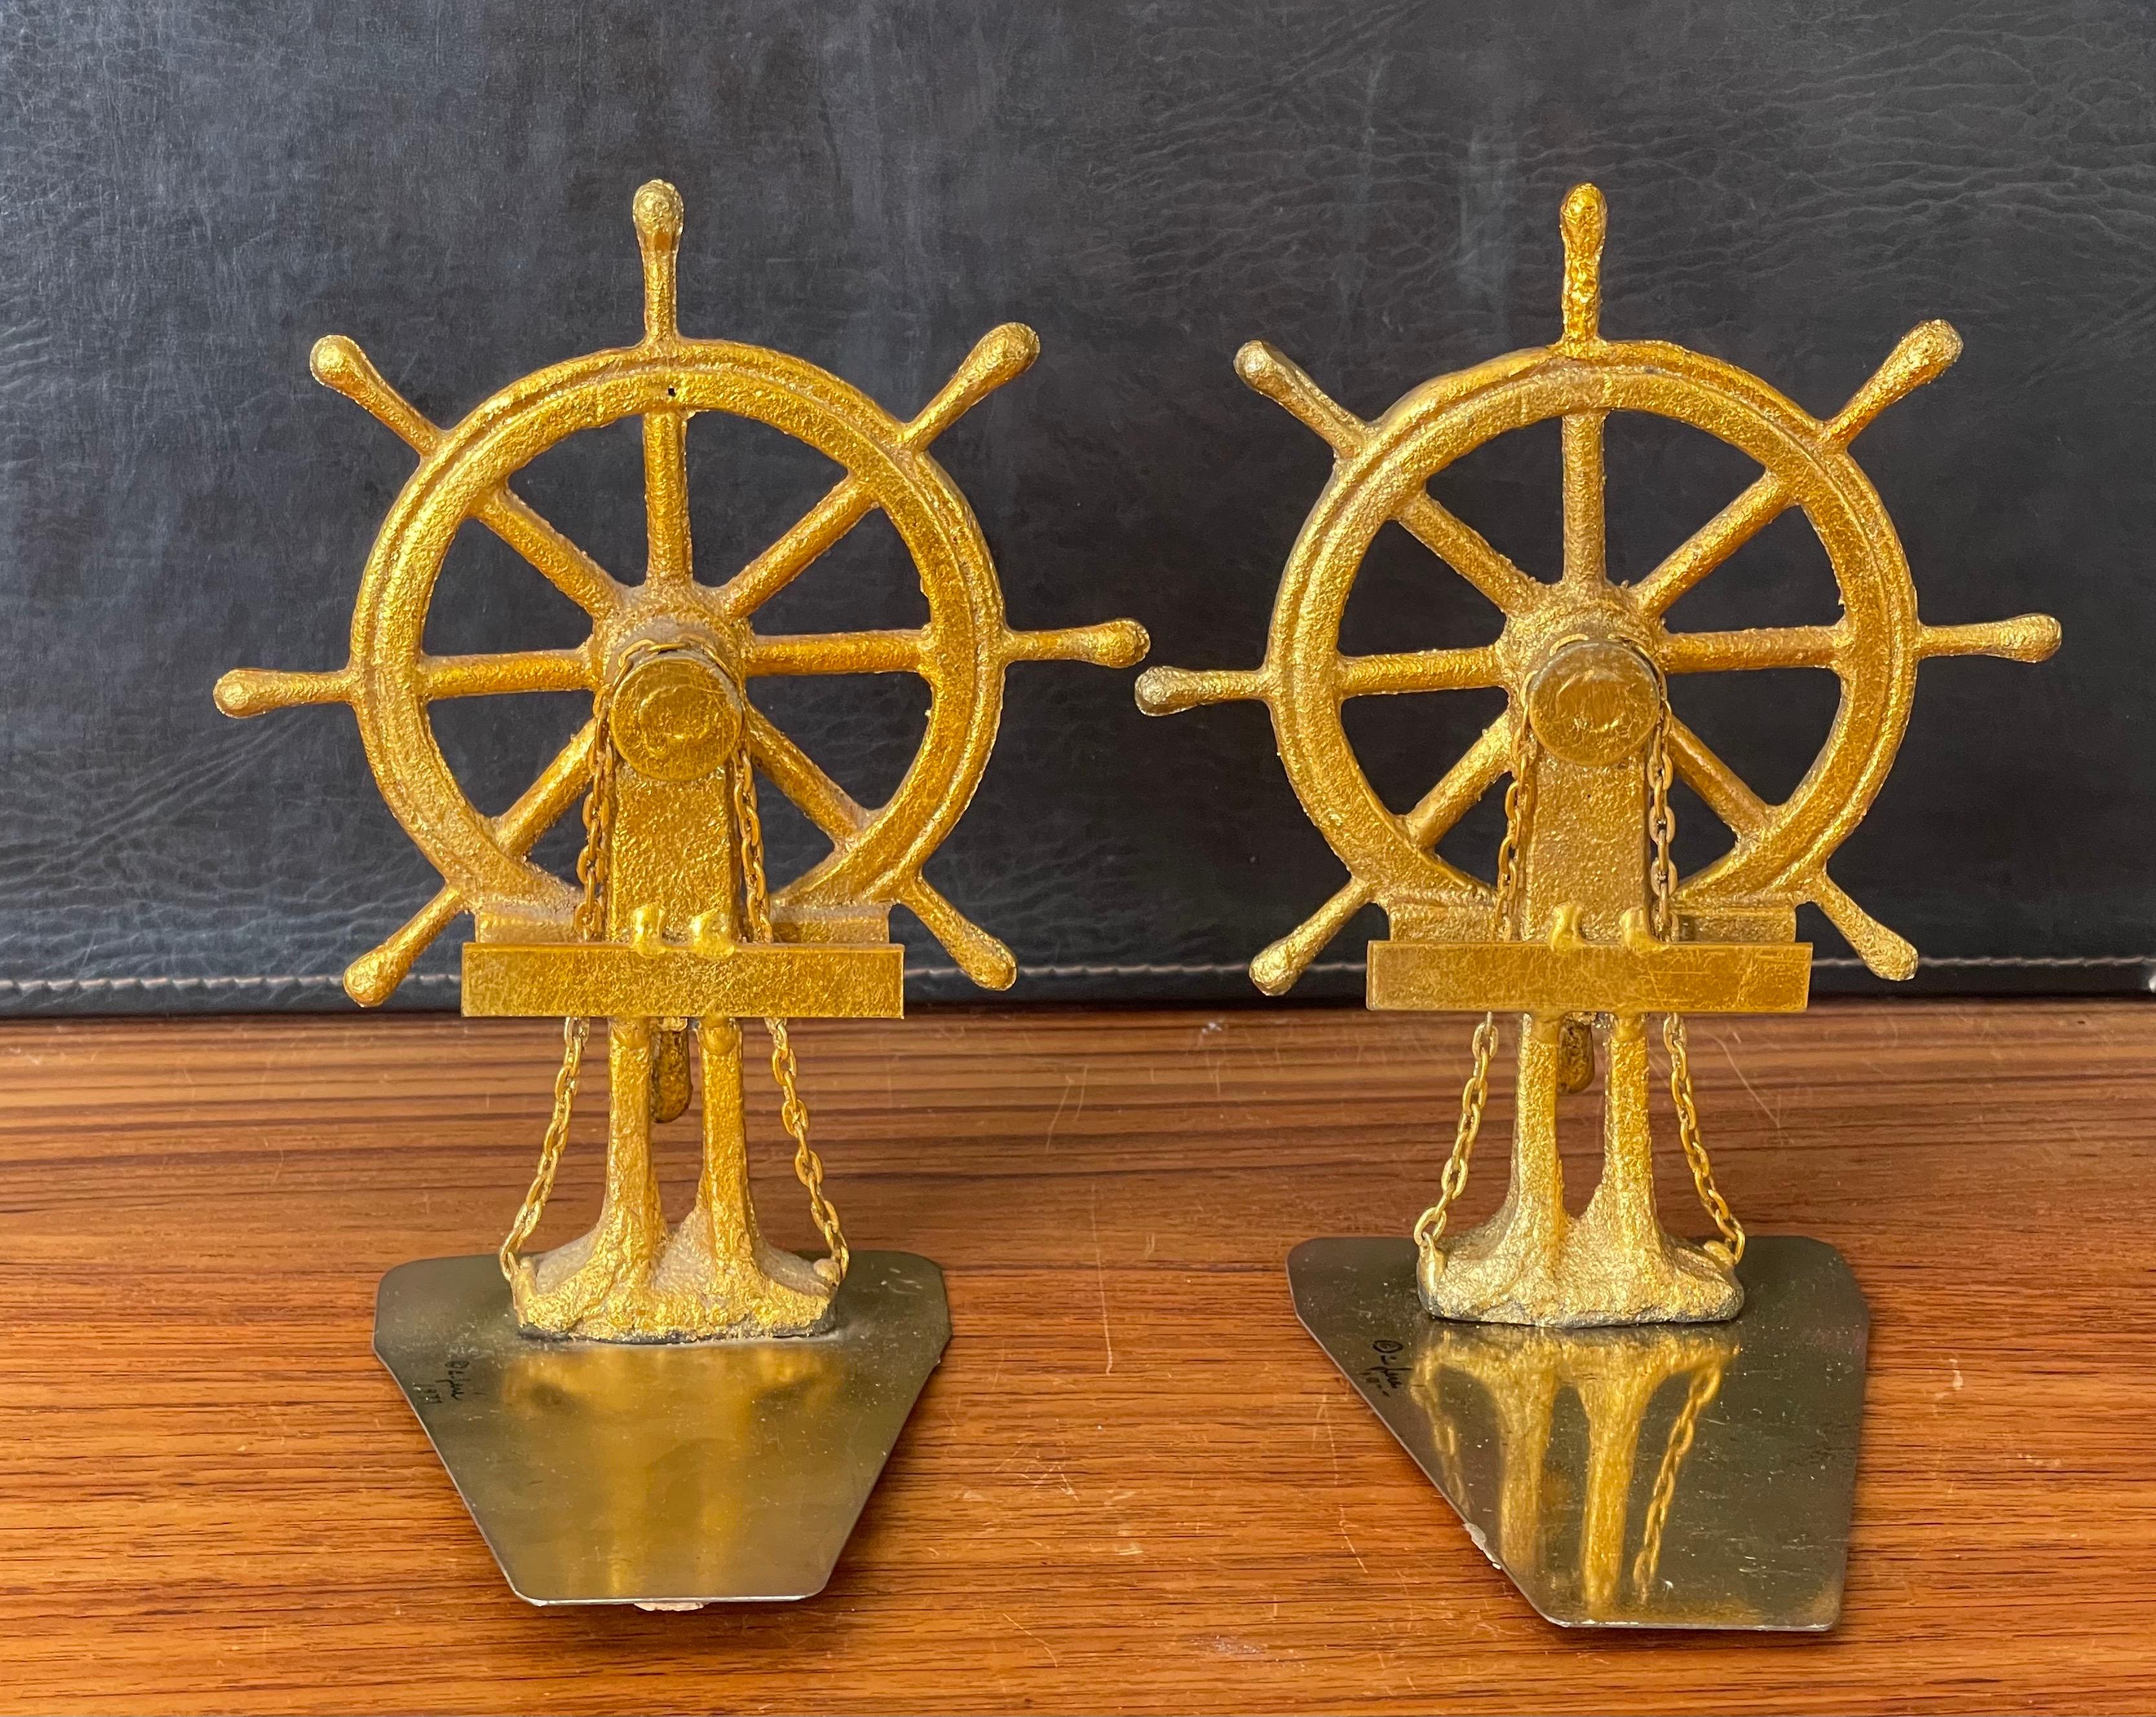 20th Century Pair of Ship Wheel Bookends in Gold Leaf Finish by Curtis Jere for Artisan House